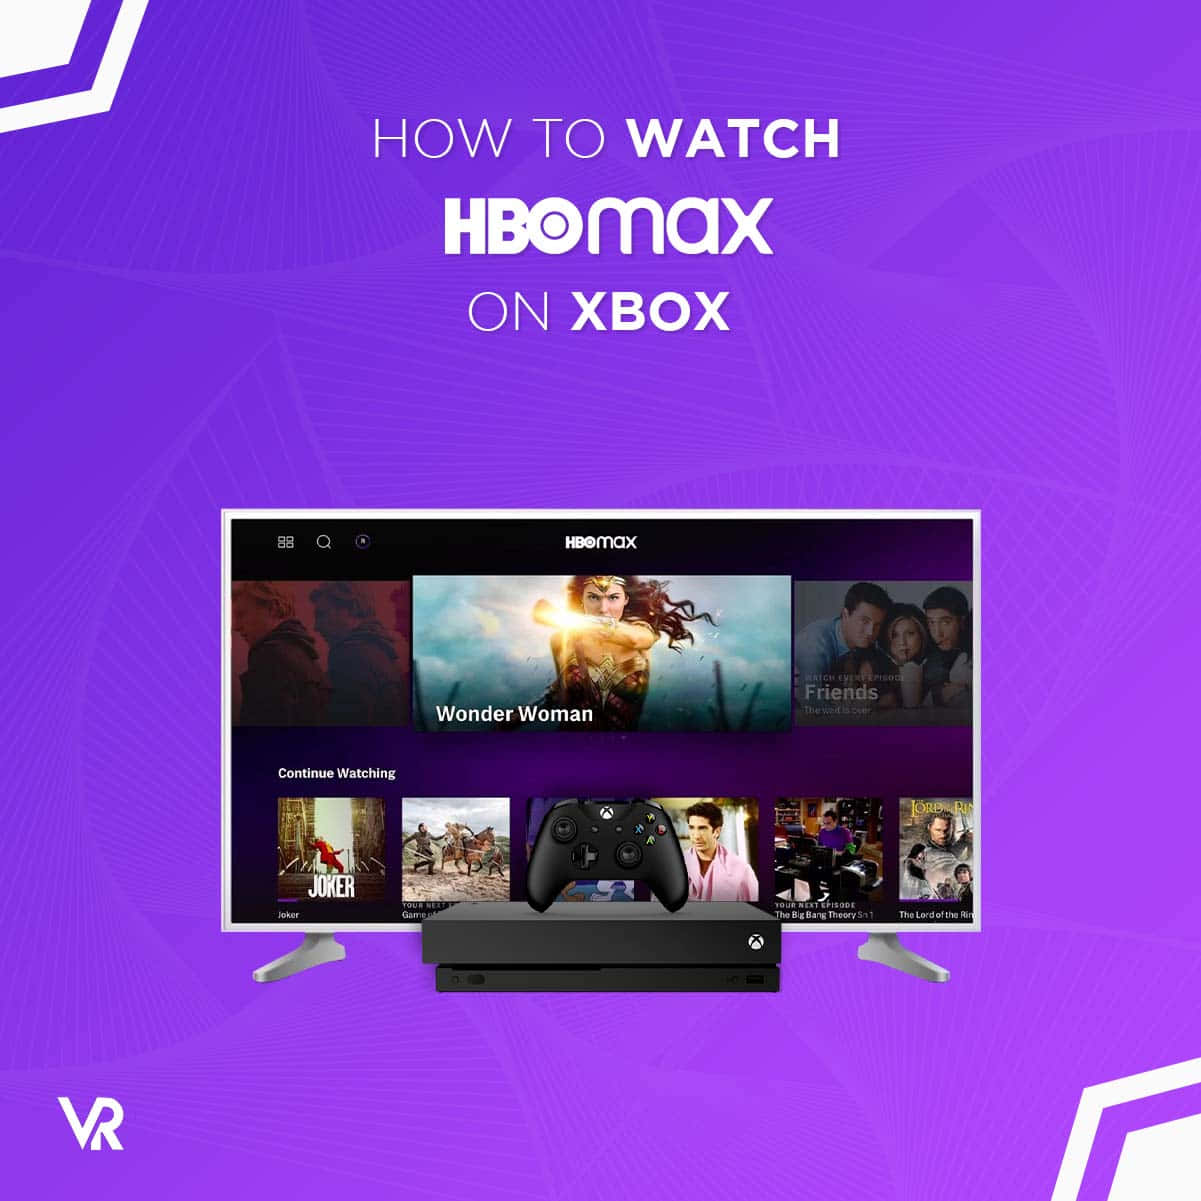 Experience premium entertainment with HBO